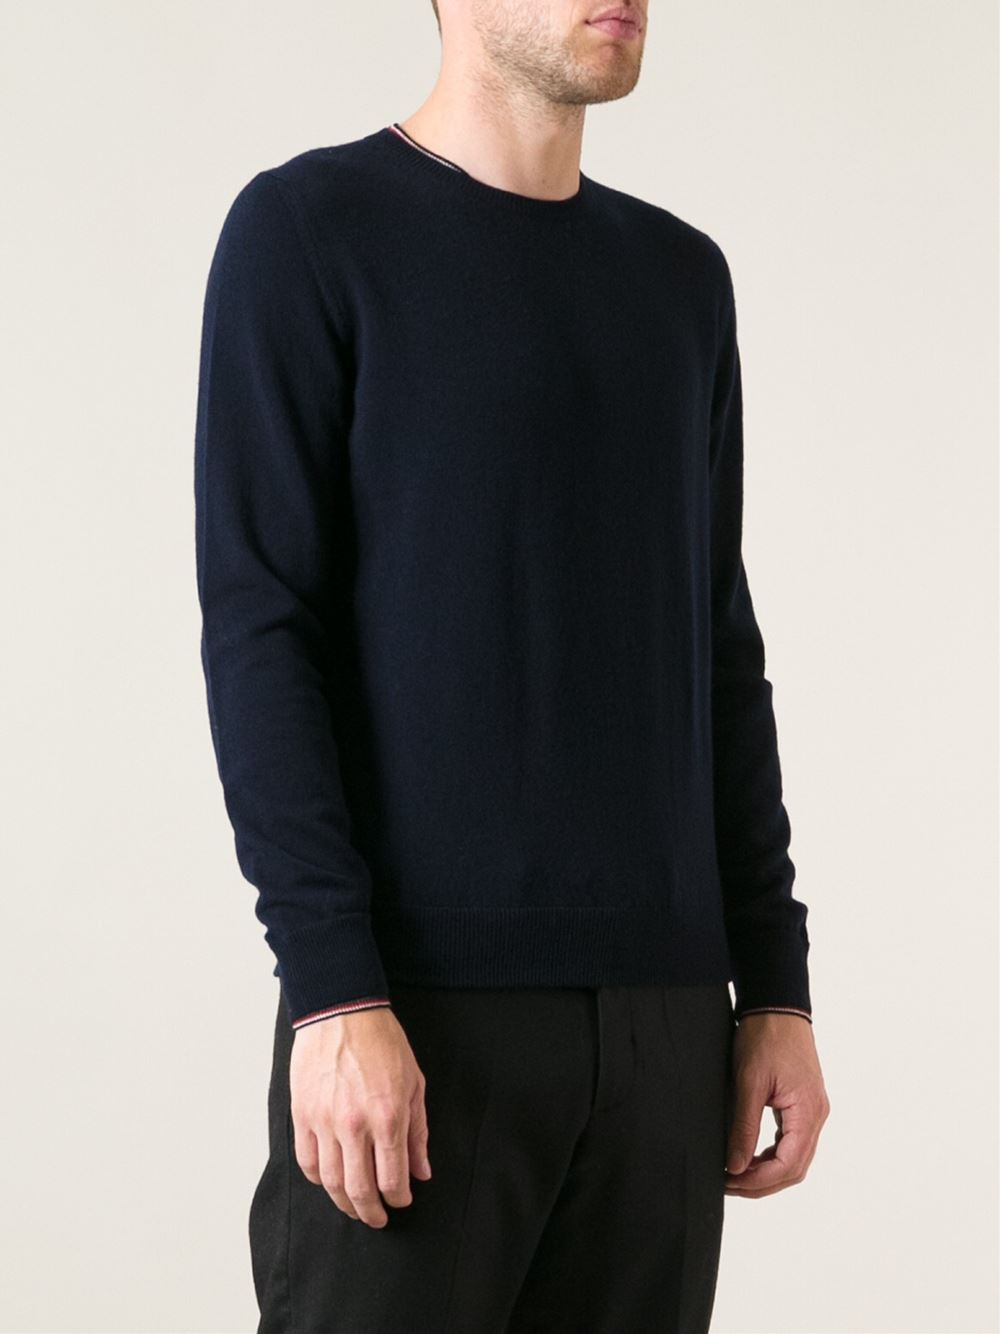 Lyst - Moncler Crew Neck Sweater in Blue for Men